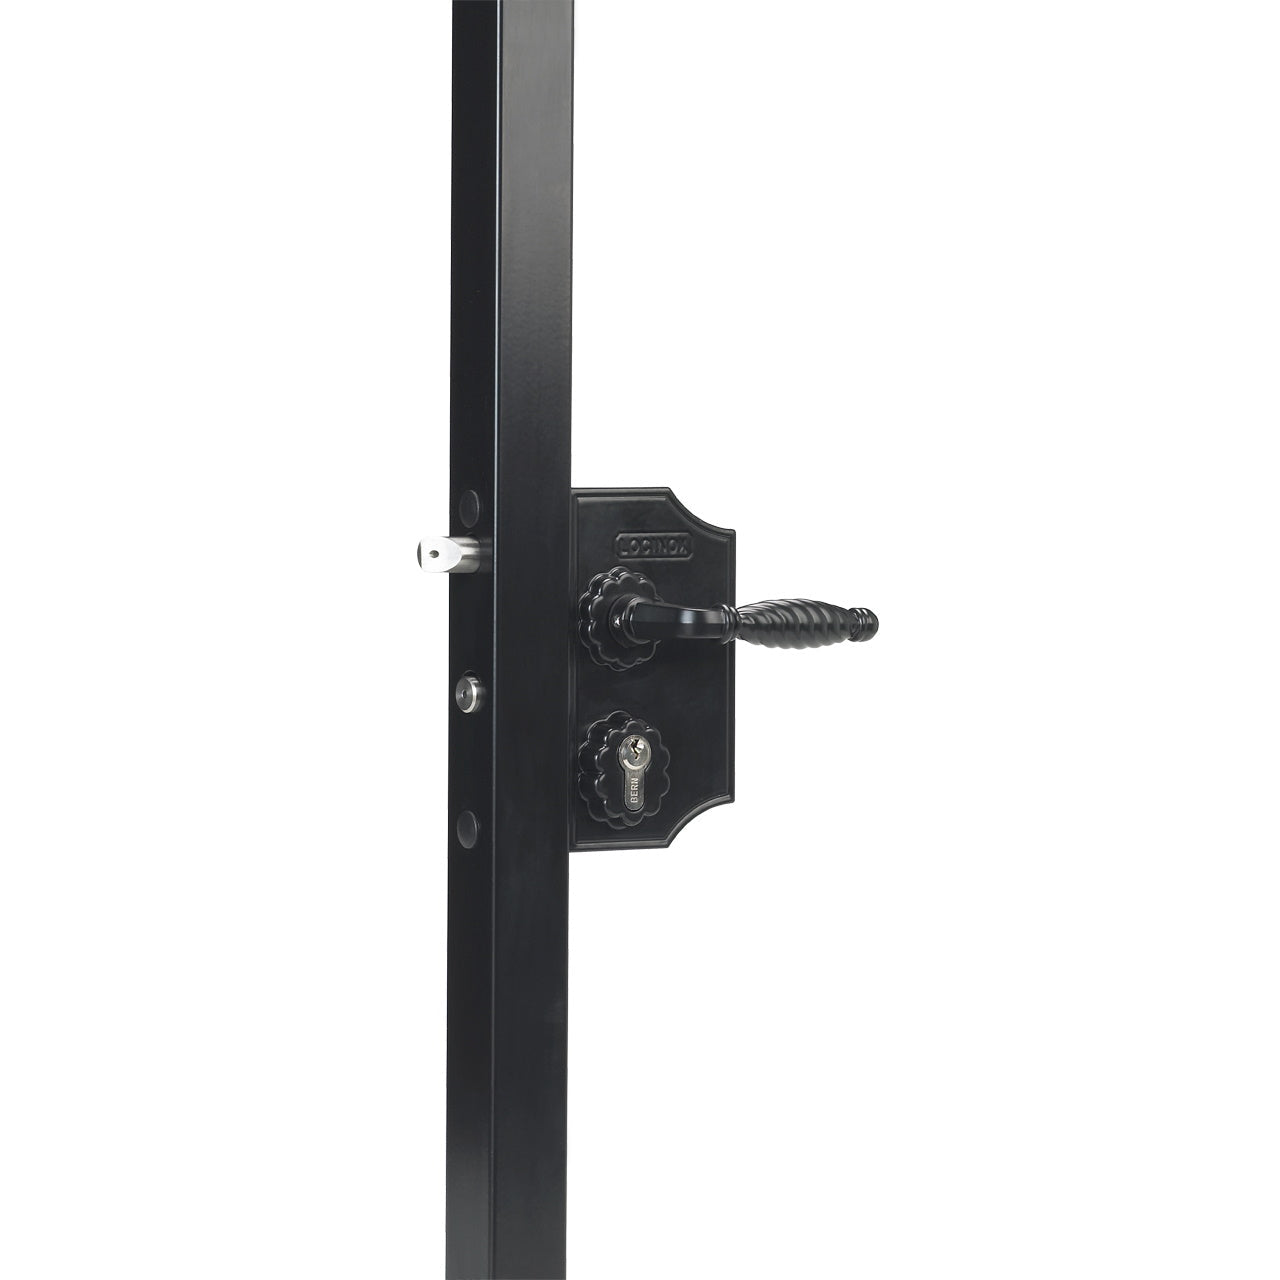 Large Surface Mounted Ornamental Gate Lock - For Square Profiles 3/8" Inch to 3" Inch - Black Finish - Sold Individually